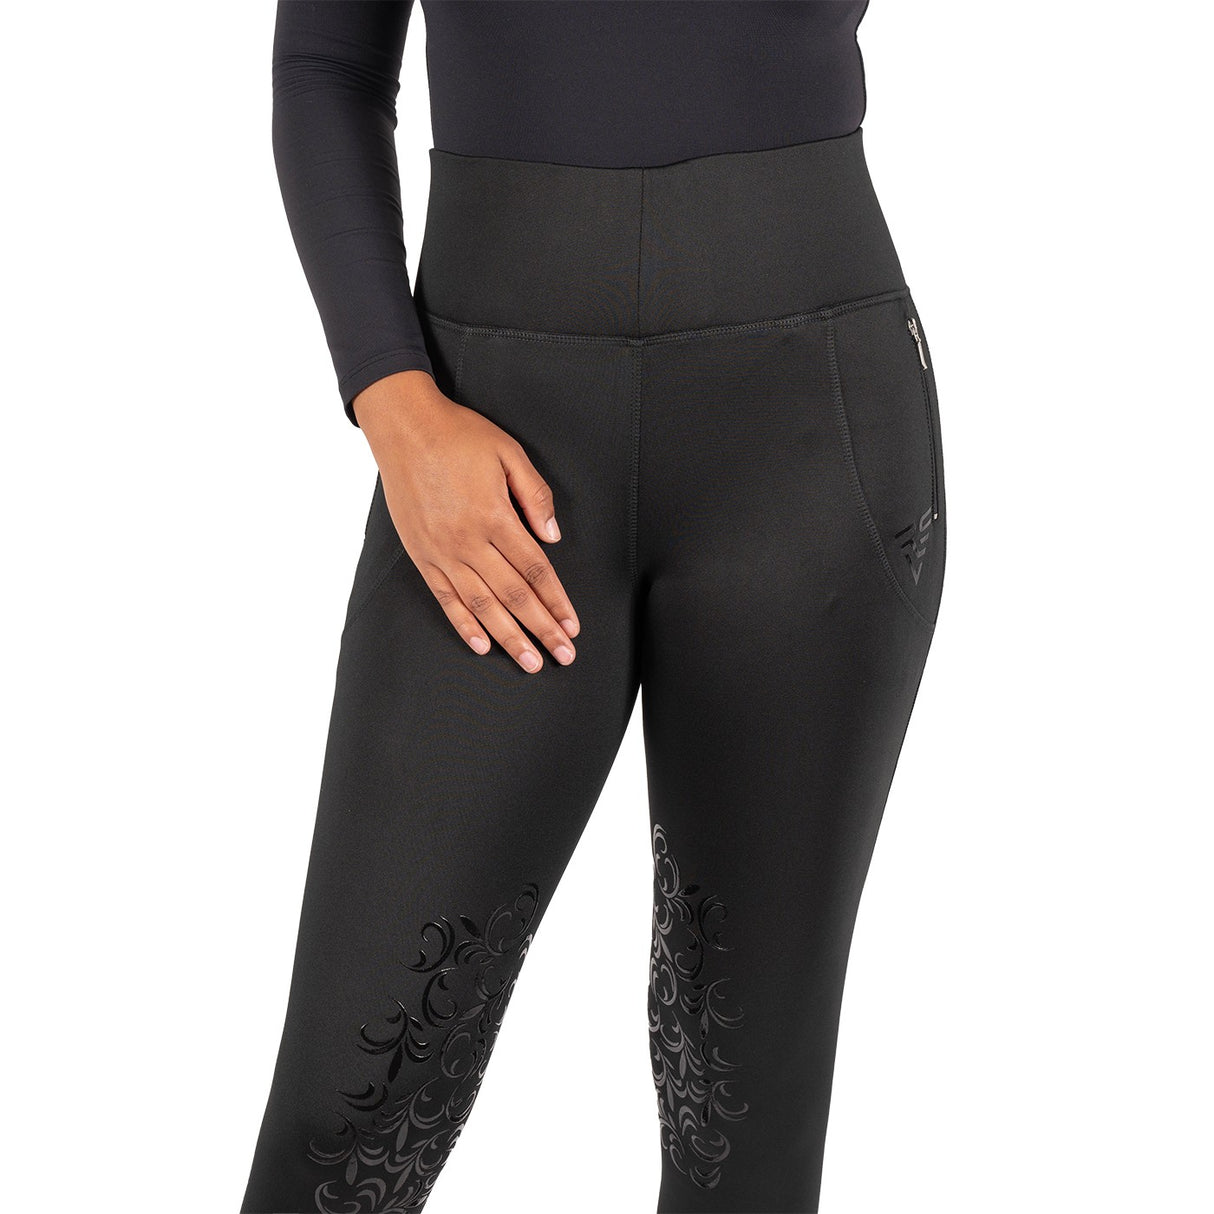 Elation Red Label Velocity Tights - Navy - Small – THE STANDBY LIST